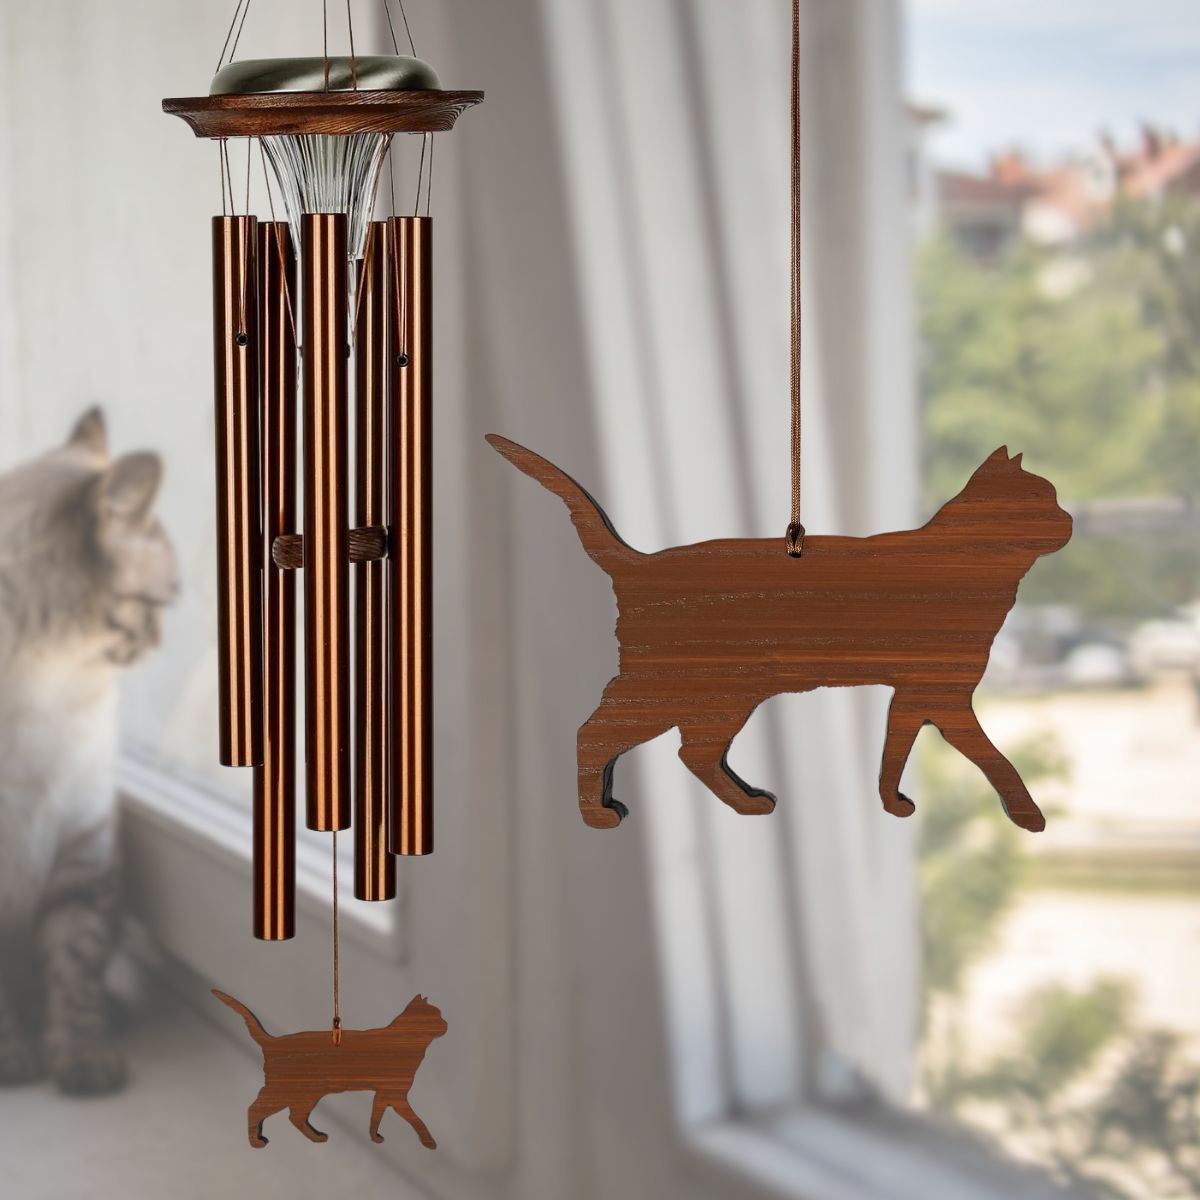 Moonlight Solar Chime 29 Inch Wind Chime - Engravable Cat Sail - Bronze